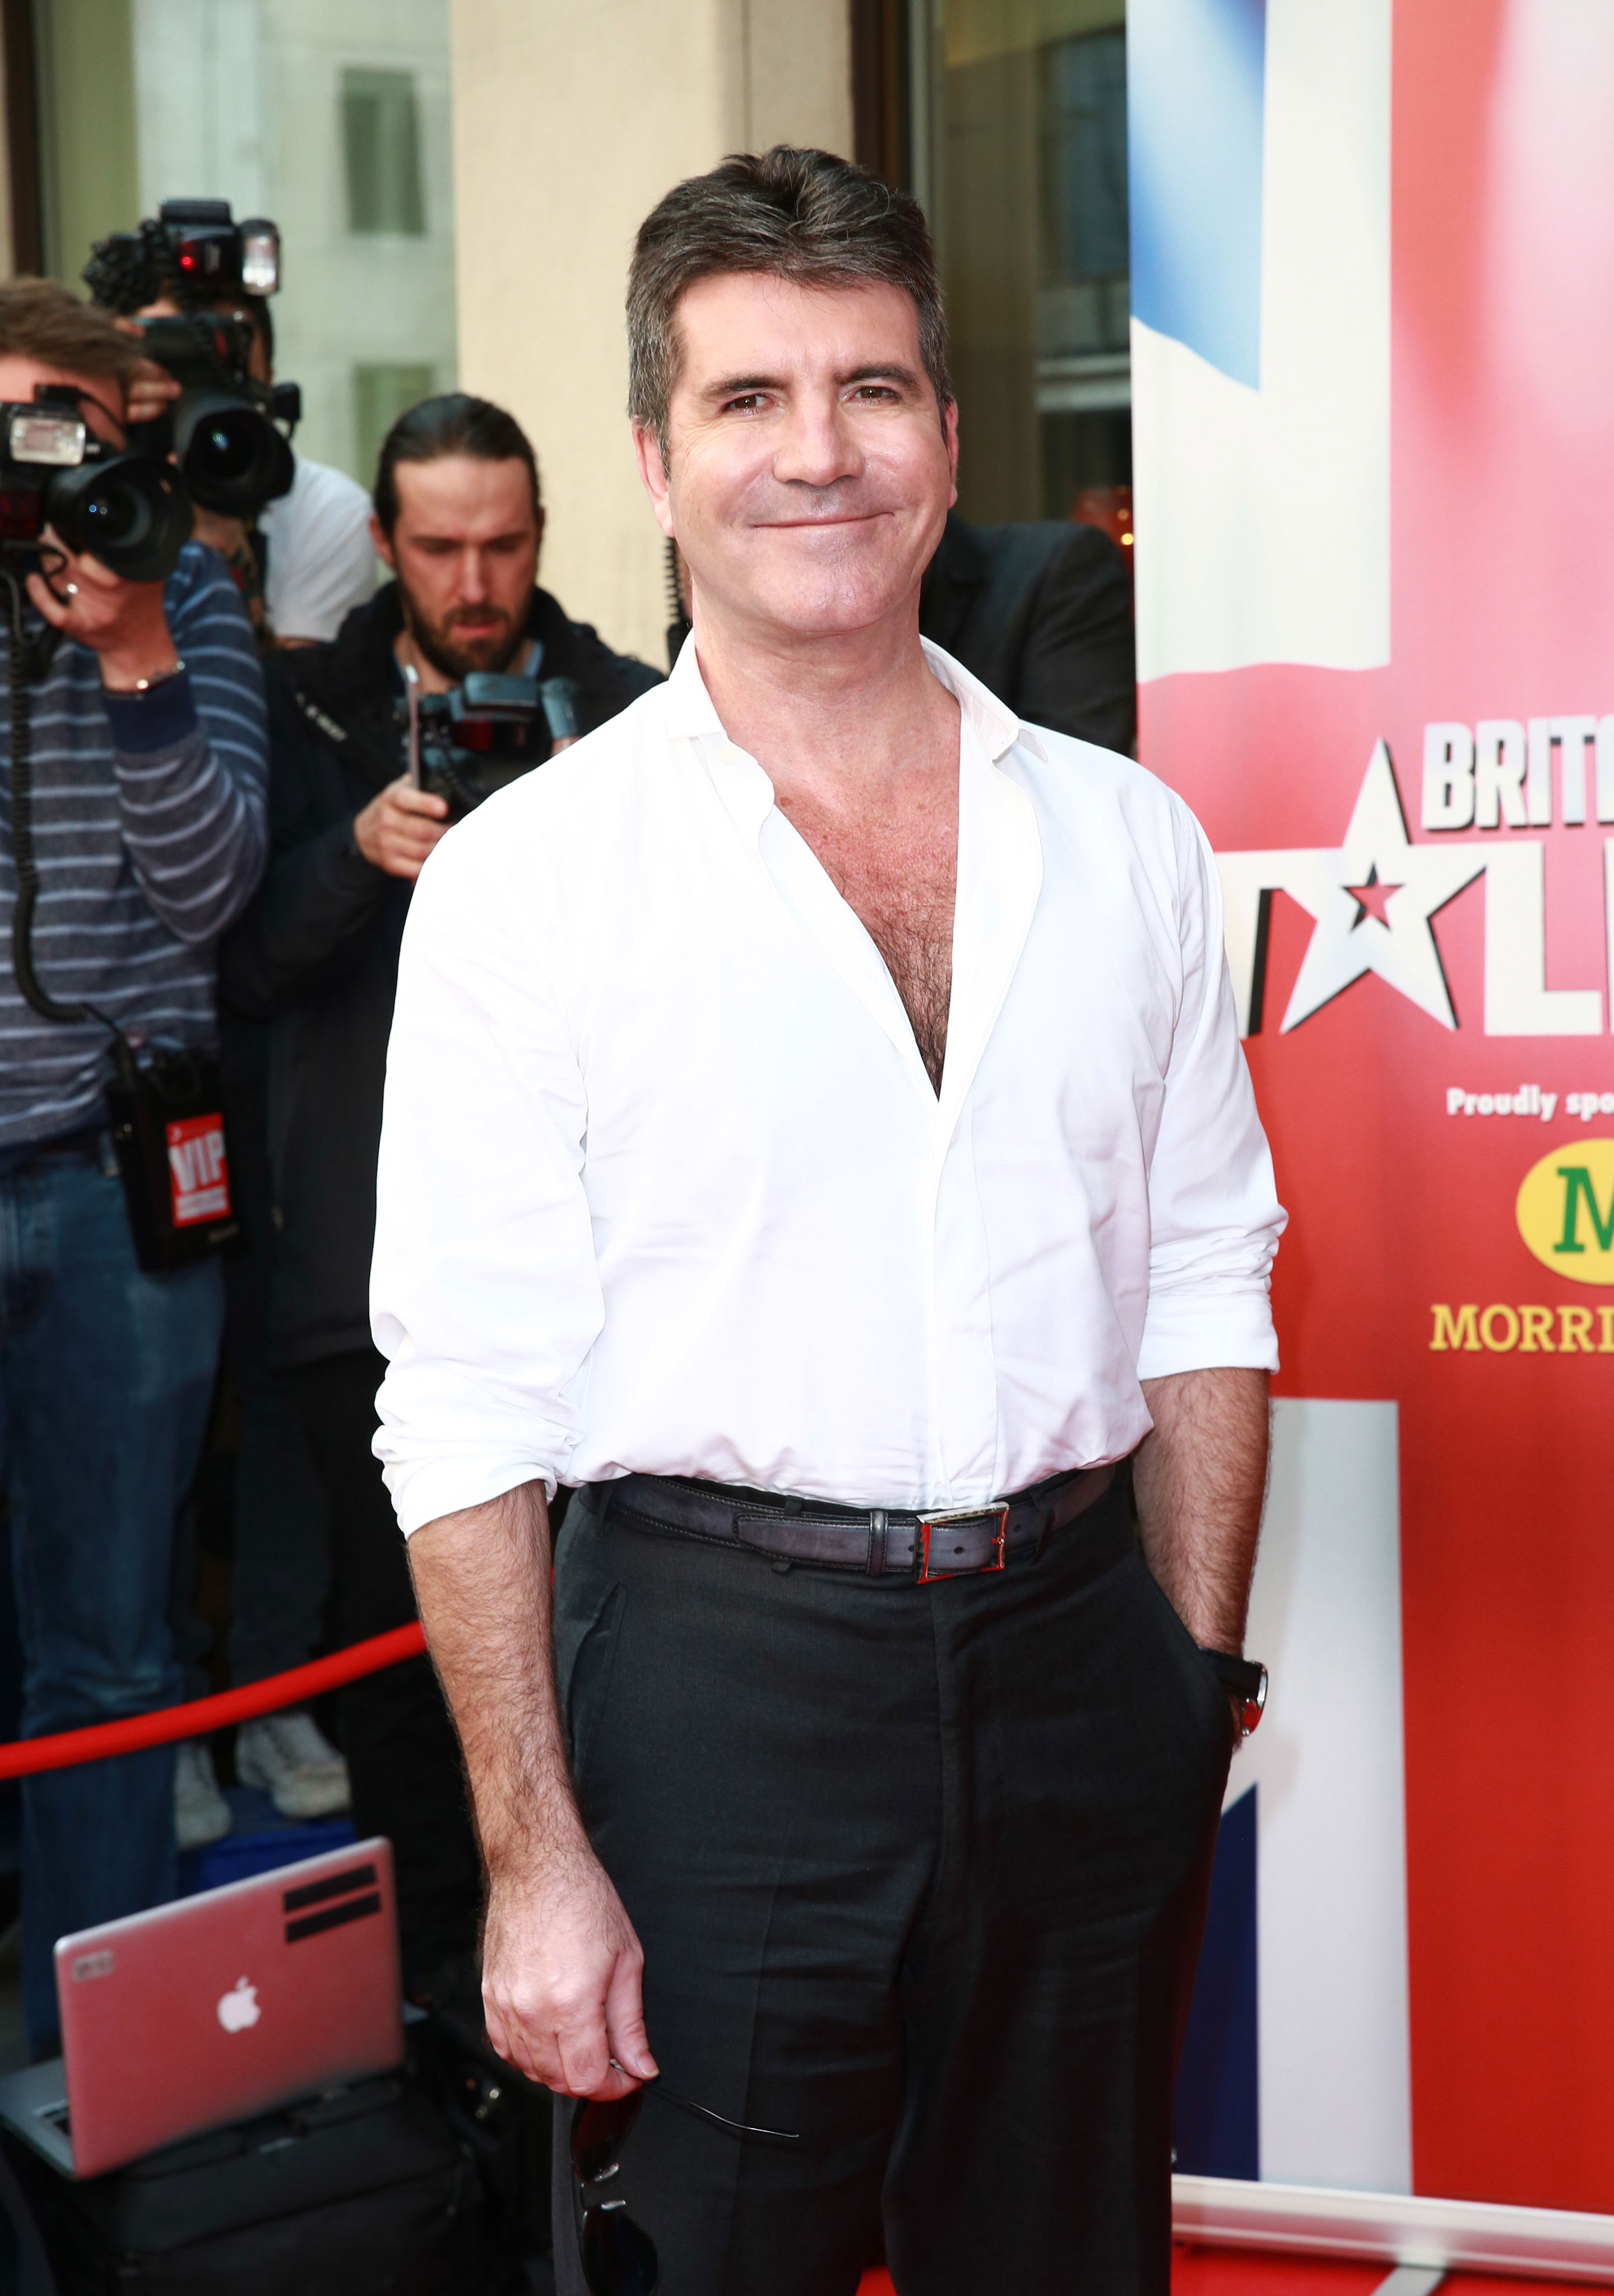 <p>Back in 2015, <a href="https://www.wonderwall.com/celebrity/profiles/overview/simon-cowell-1009.article">Simon Cowell</a> told Britain's Mirror that he'd scaled back on his beloved <a href="https://www.wonderwall.com/news/simon-cowell-admits-he-had-2700-dollar-plastic-surgery-facelift-procedure-photos-3014121.article">Botox injections</a> after <a href="https://www.wonderwall.com/celebrity/profiles/overview/sharon-osbourne-1449.article">Sharon Osbourne</a> pointed out he couldn't move his face much anymore. "Hopefully I look better now -- I probably did have a little too much Botox a couple of years ago, because everyone on TV has it," he said. "Now I have facials, but nothing too extravagant at the moment." That changed a few years later... Keep reading to see what Simon did to his face next and what it looks like now...</p>